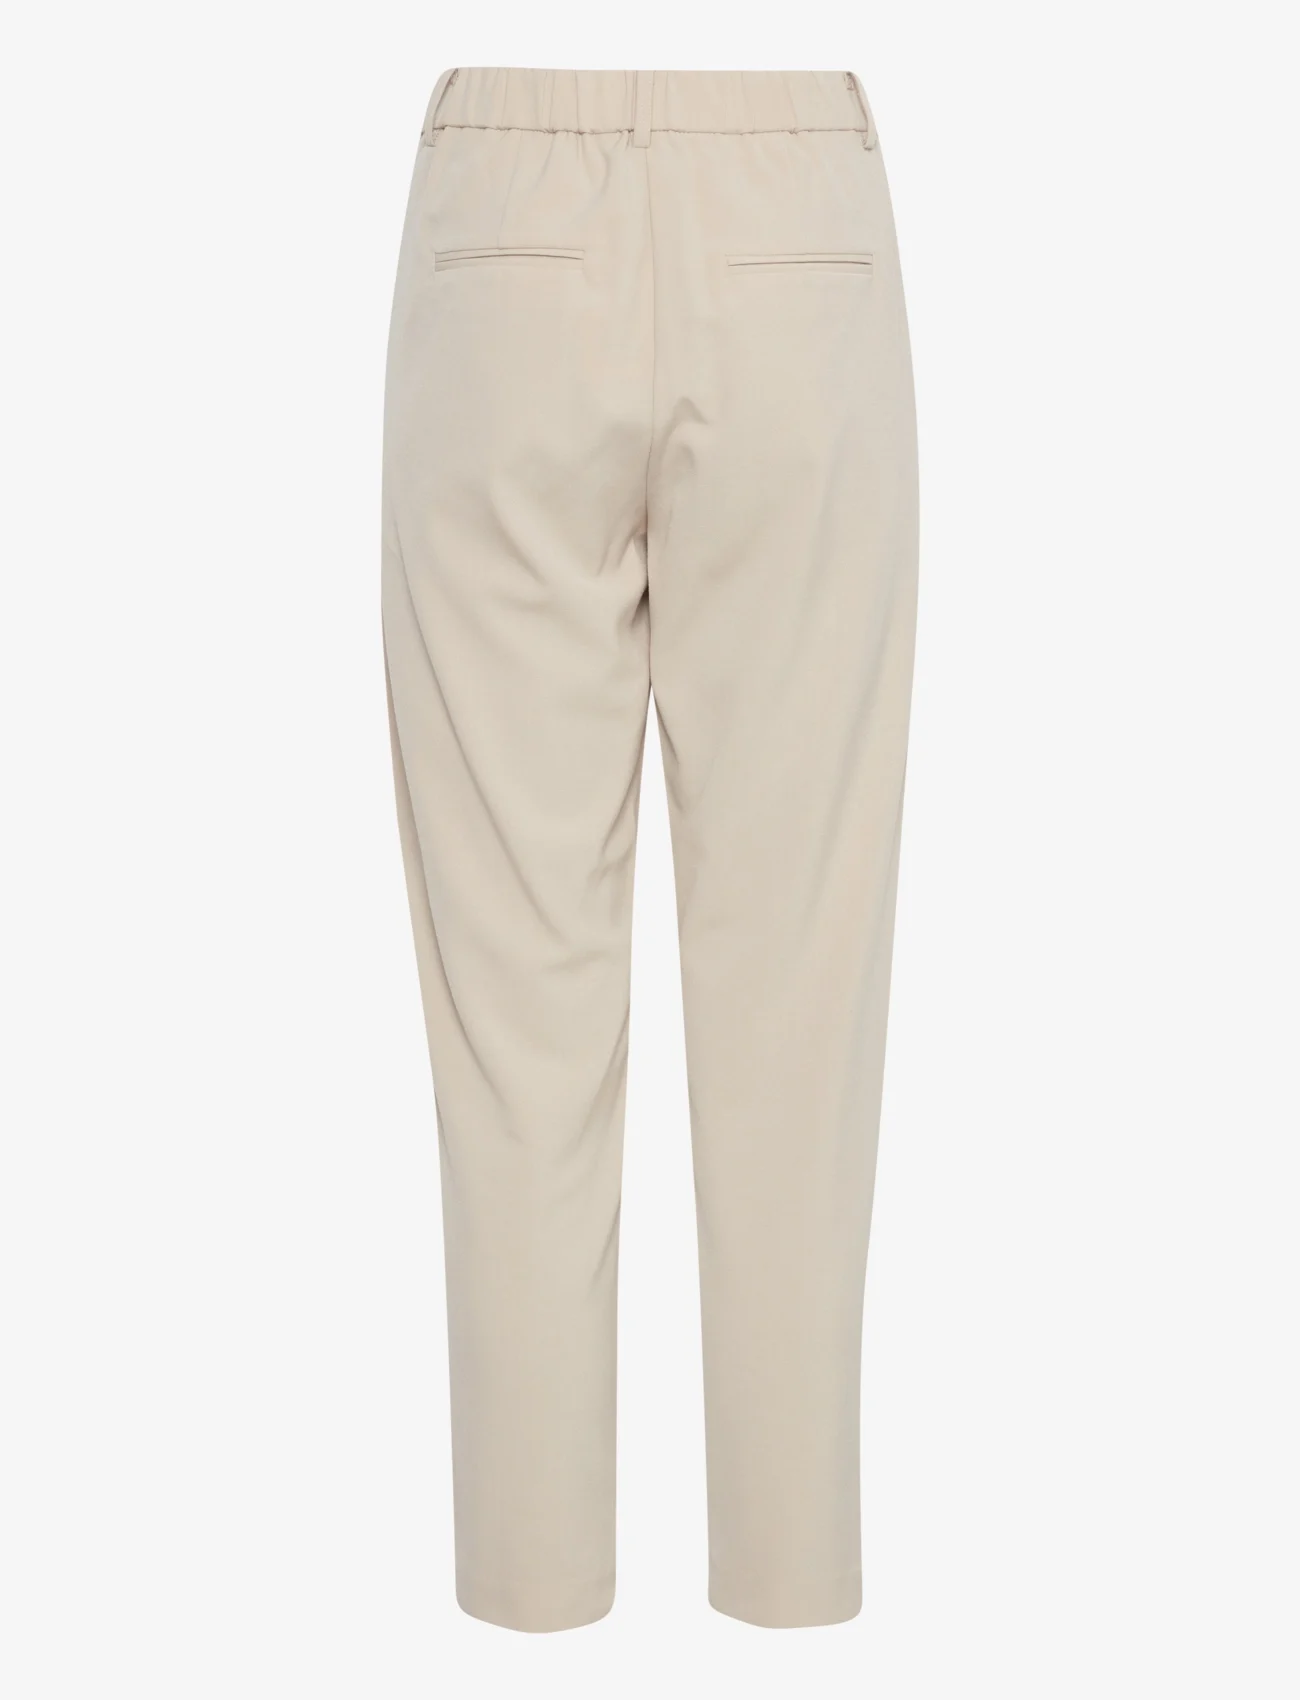 b.young - BYDANTA PANTS CROP - - tailored trousers - cement - 1